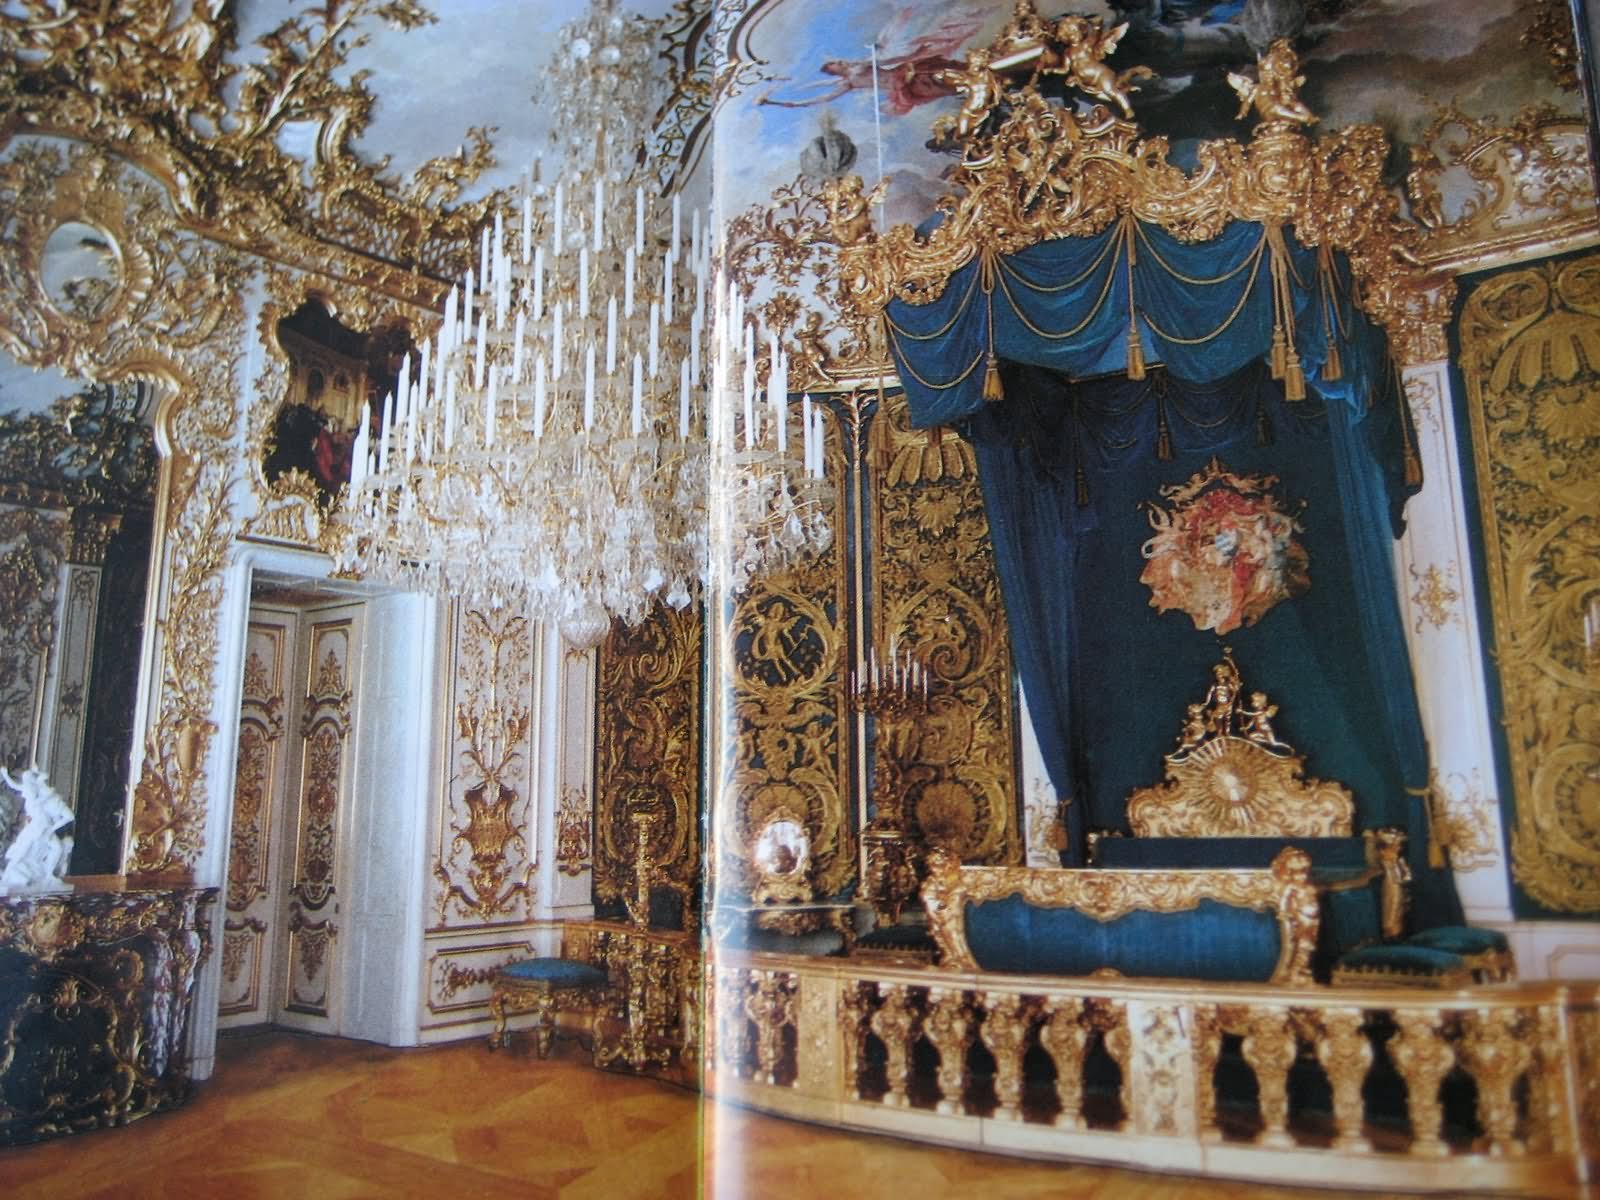 Interior Room Of The Linderhof Palace In Germany